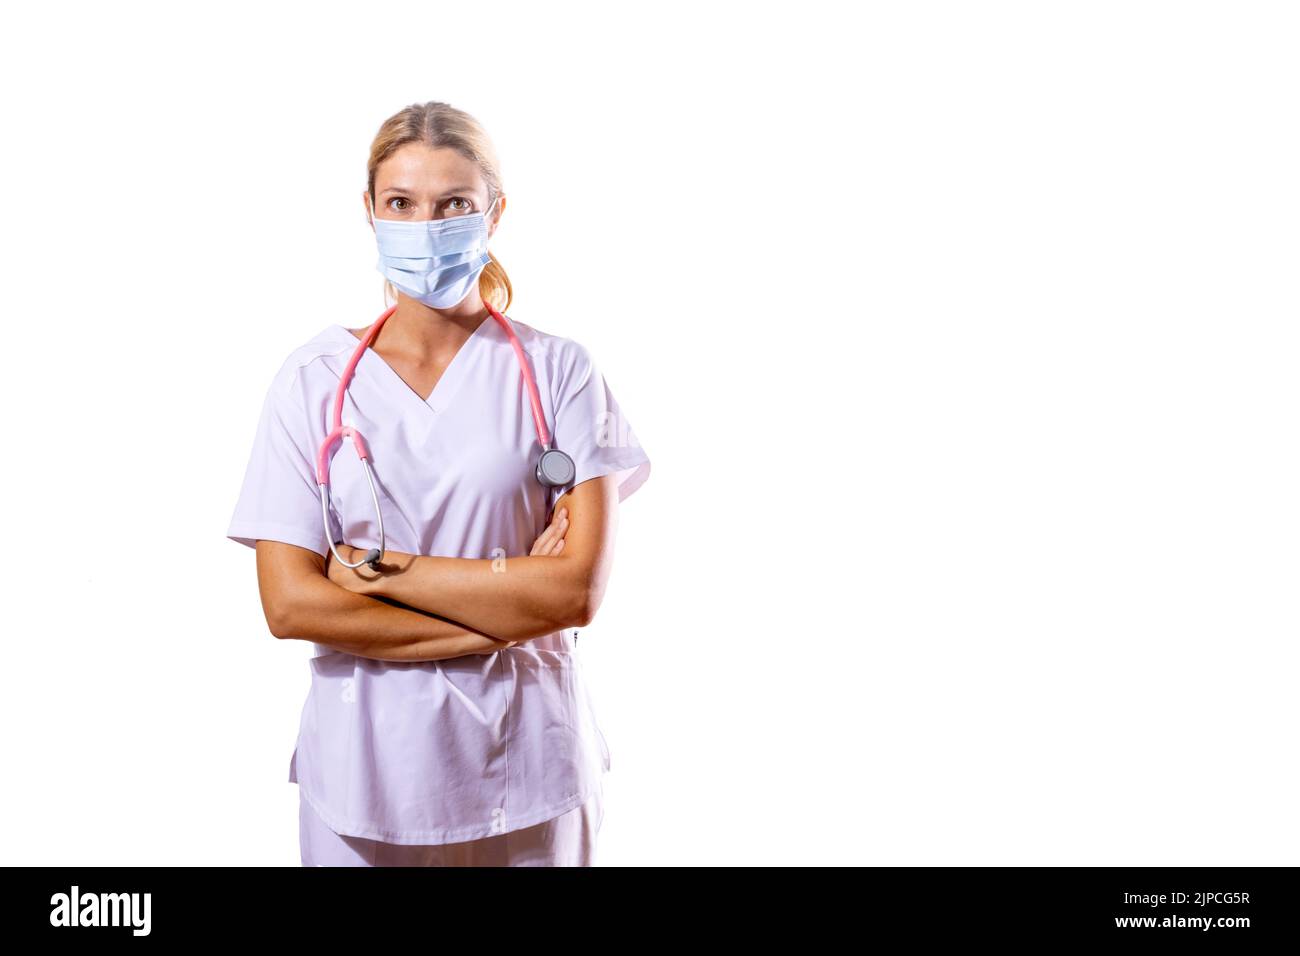 medical girl adjusting her surgical mask. Health concept. Coronavirus. COVID-19. Pandemic. White background and copy space Stock Photo